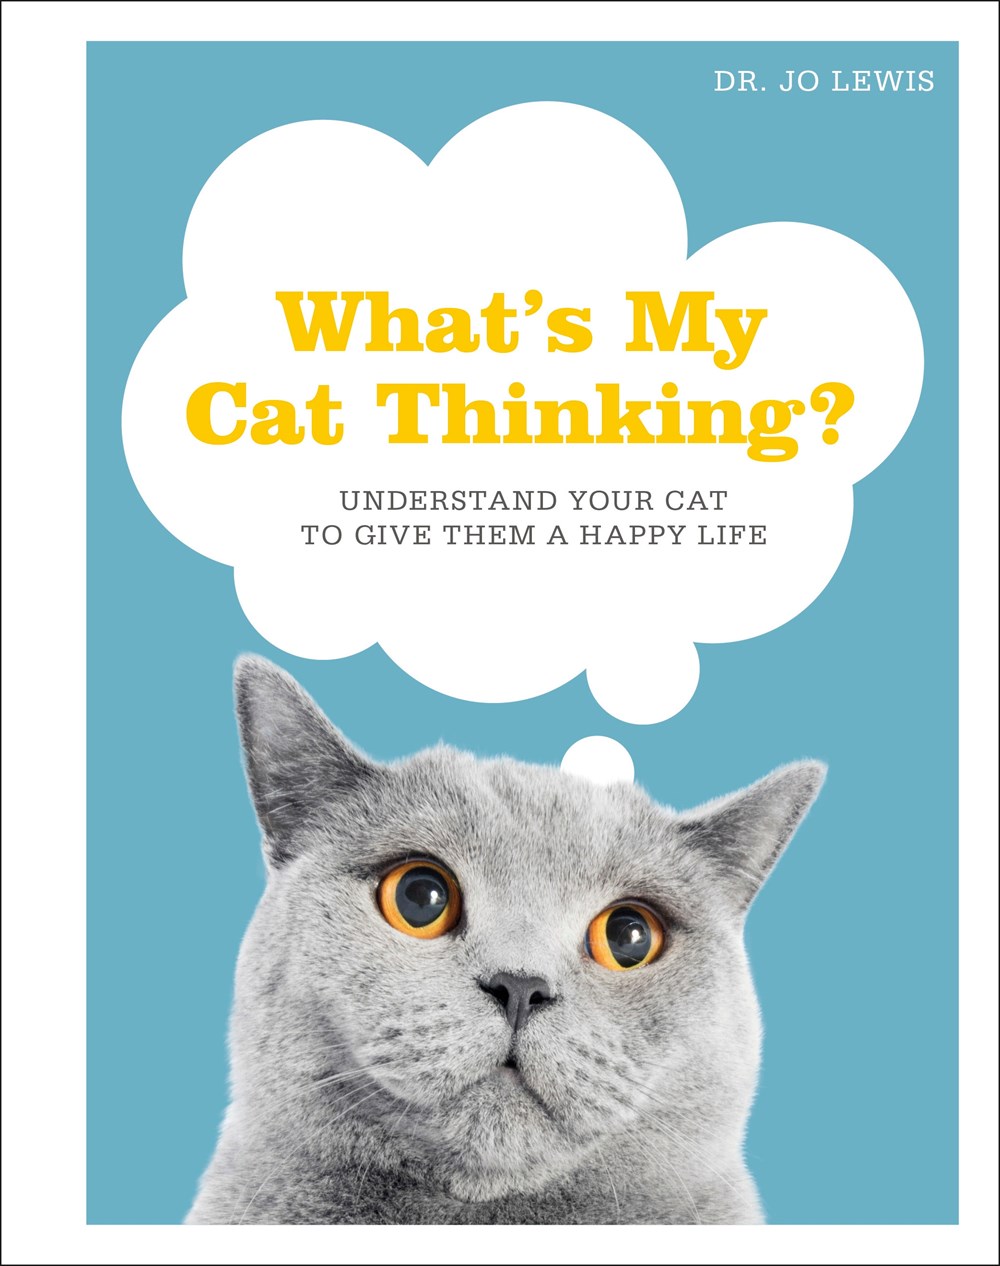 What’s My Cat Thinking? Understand Your Cat To Give Them a Happy Life